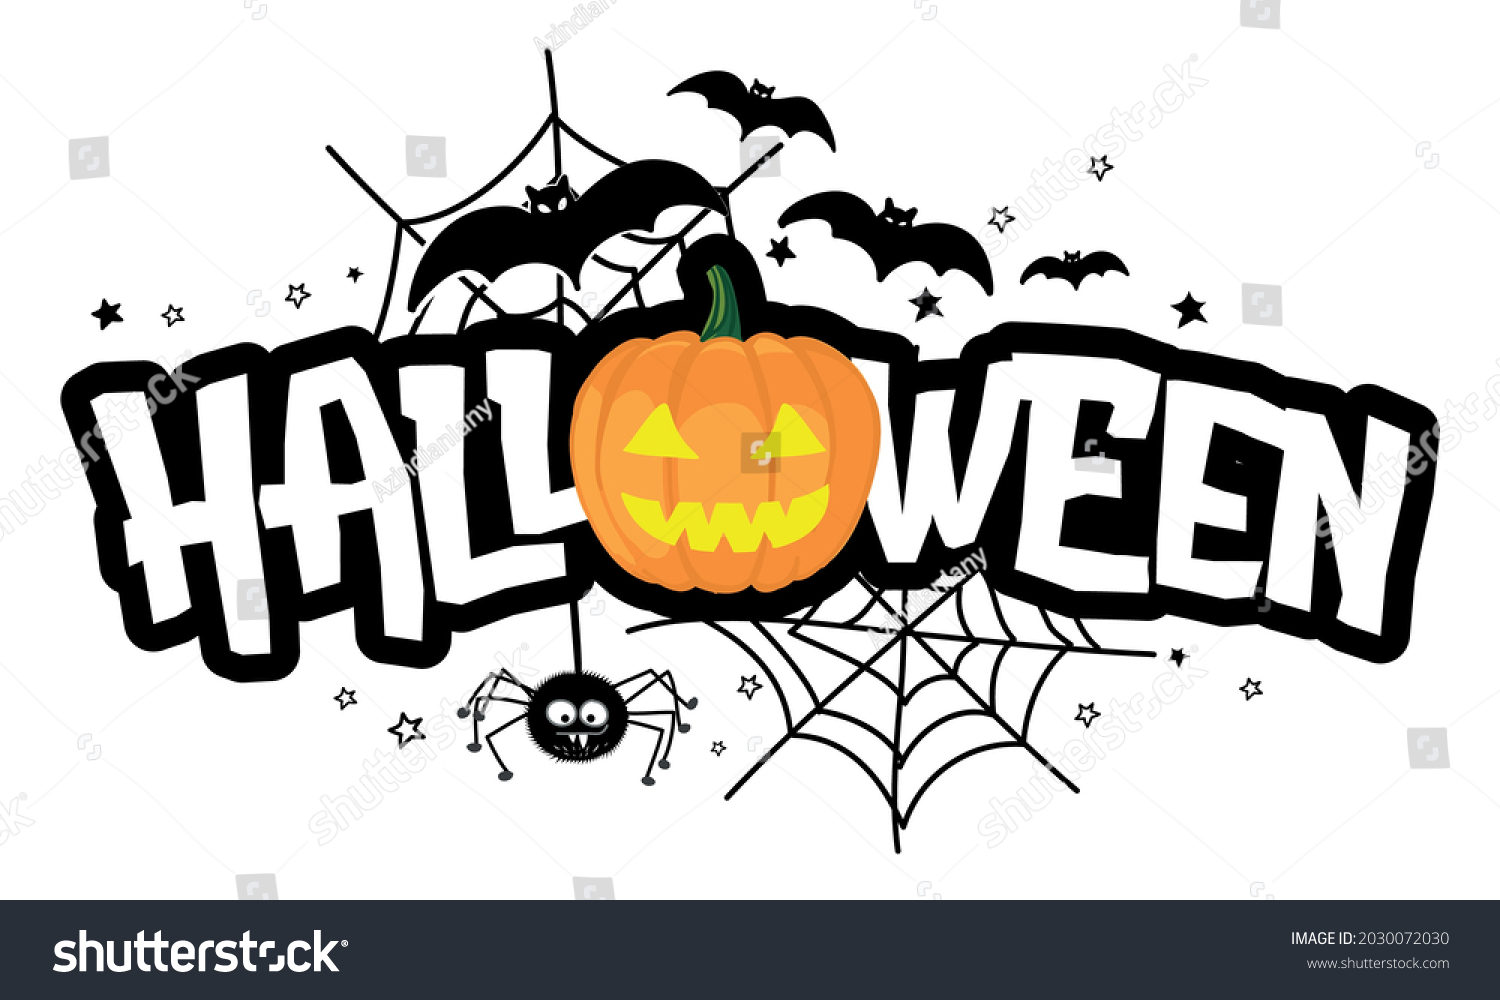 SVG of Happy Halloween - halloween quote on white background with a cute hanging spider and jack o lantern pumpkin.  Good for t-shirt, mug, banner, gift, printing press. Holiday quote, Sales promotion. svg